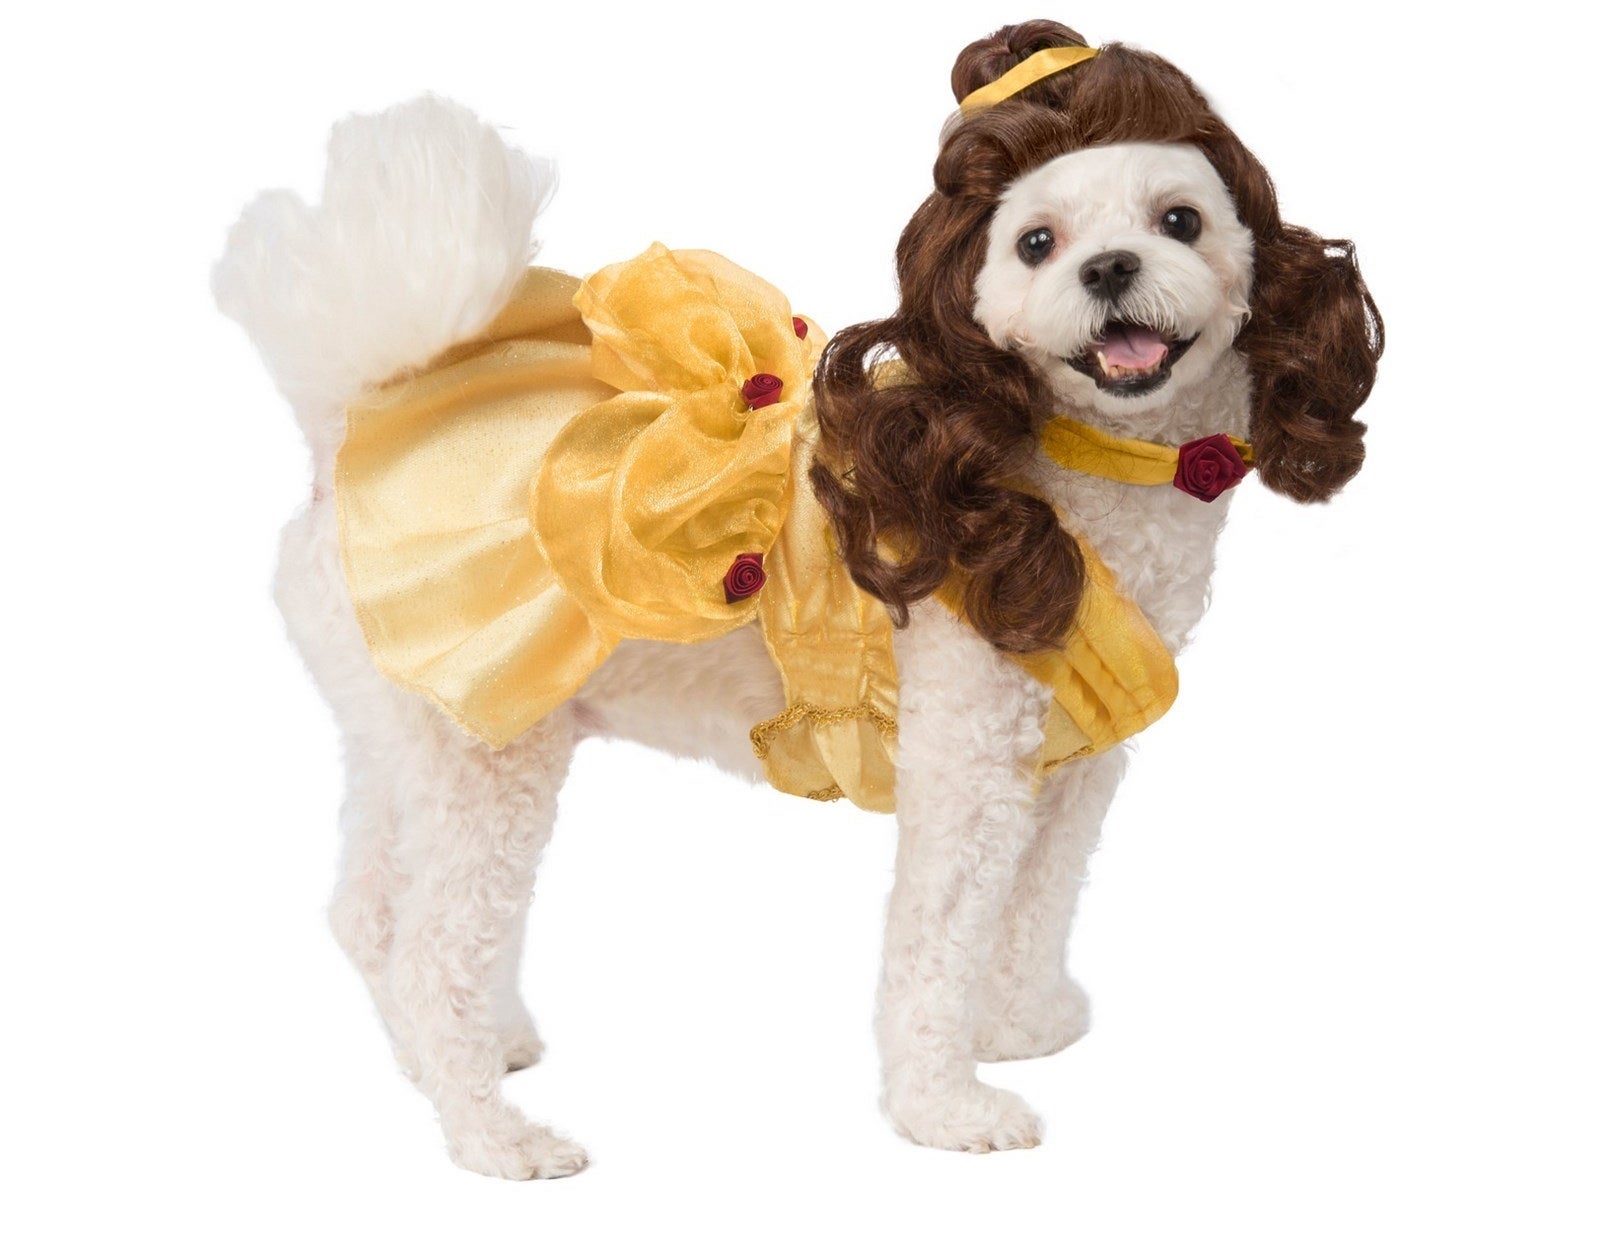 dog wearing the princess Belle costume